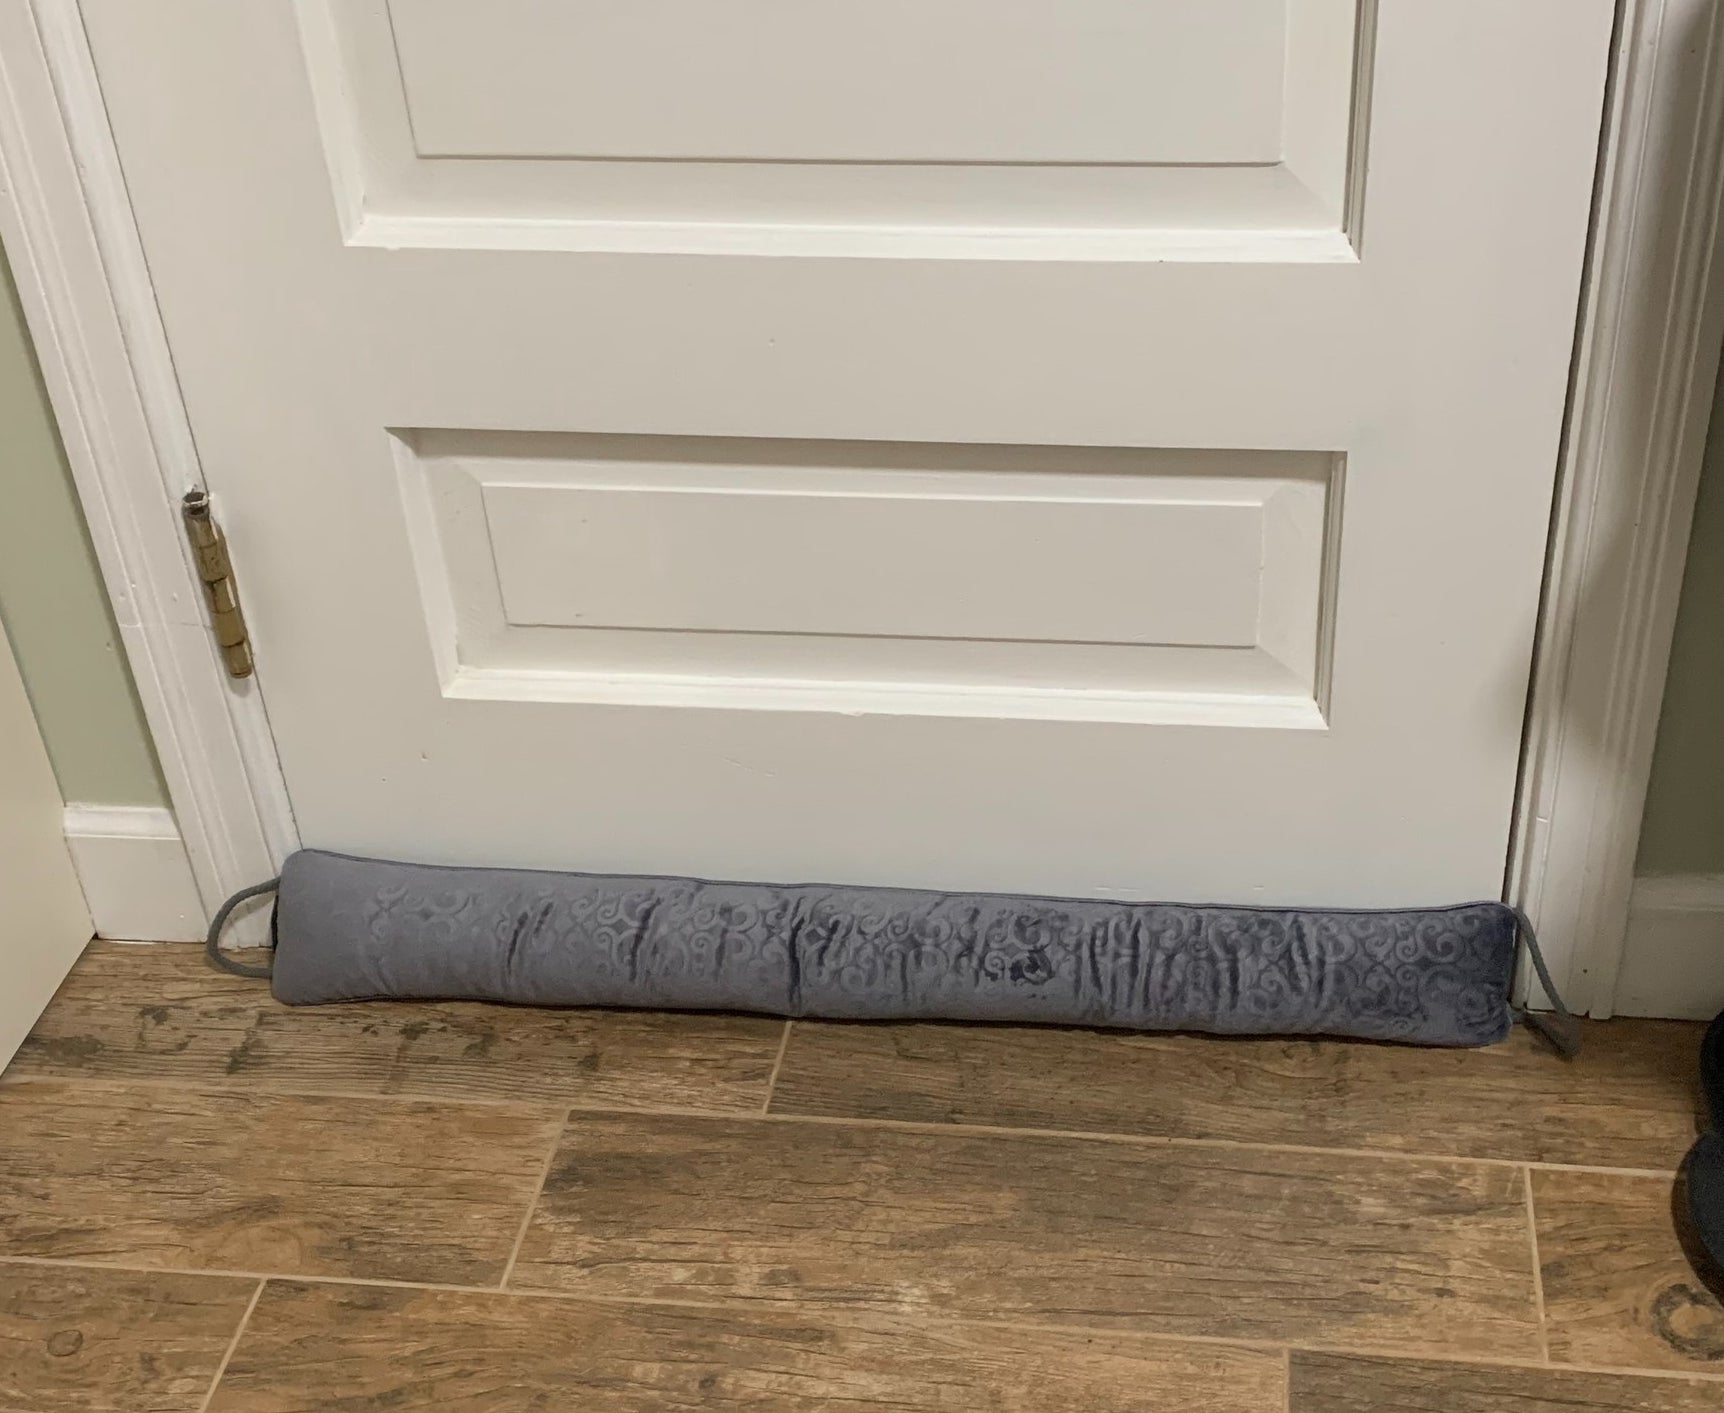 A reviewer picture of the gray door stopper against a white door